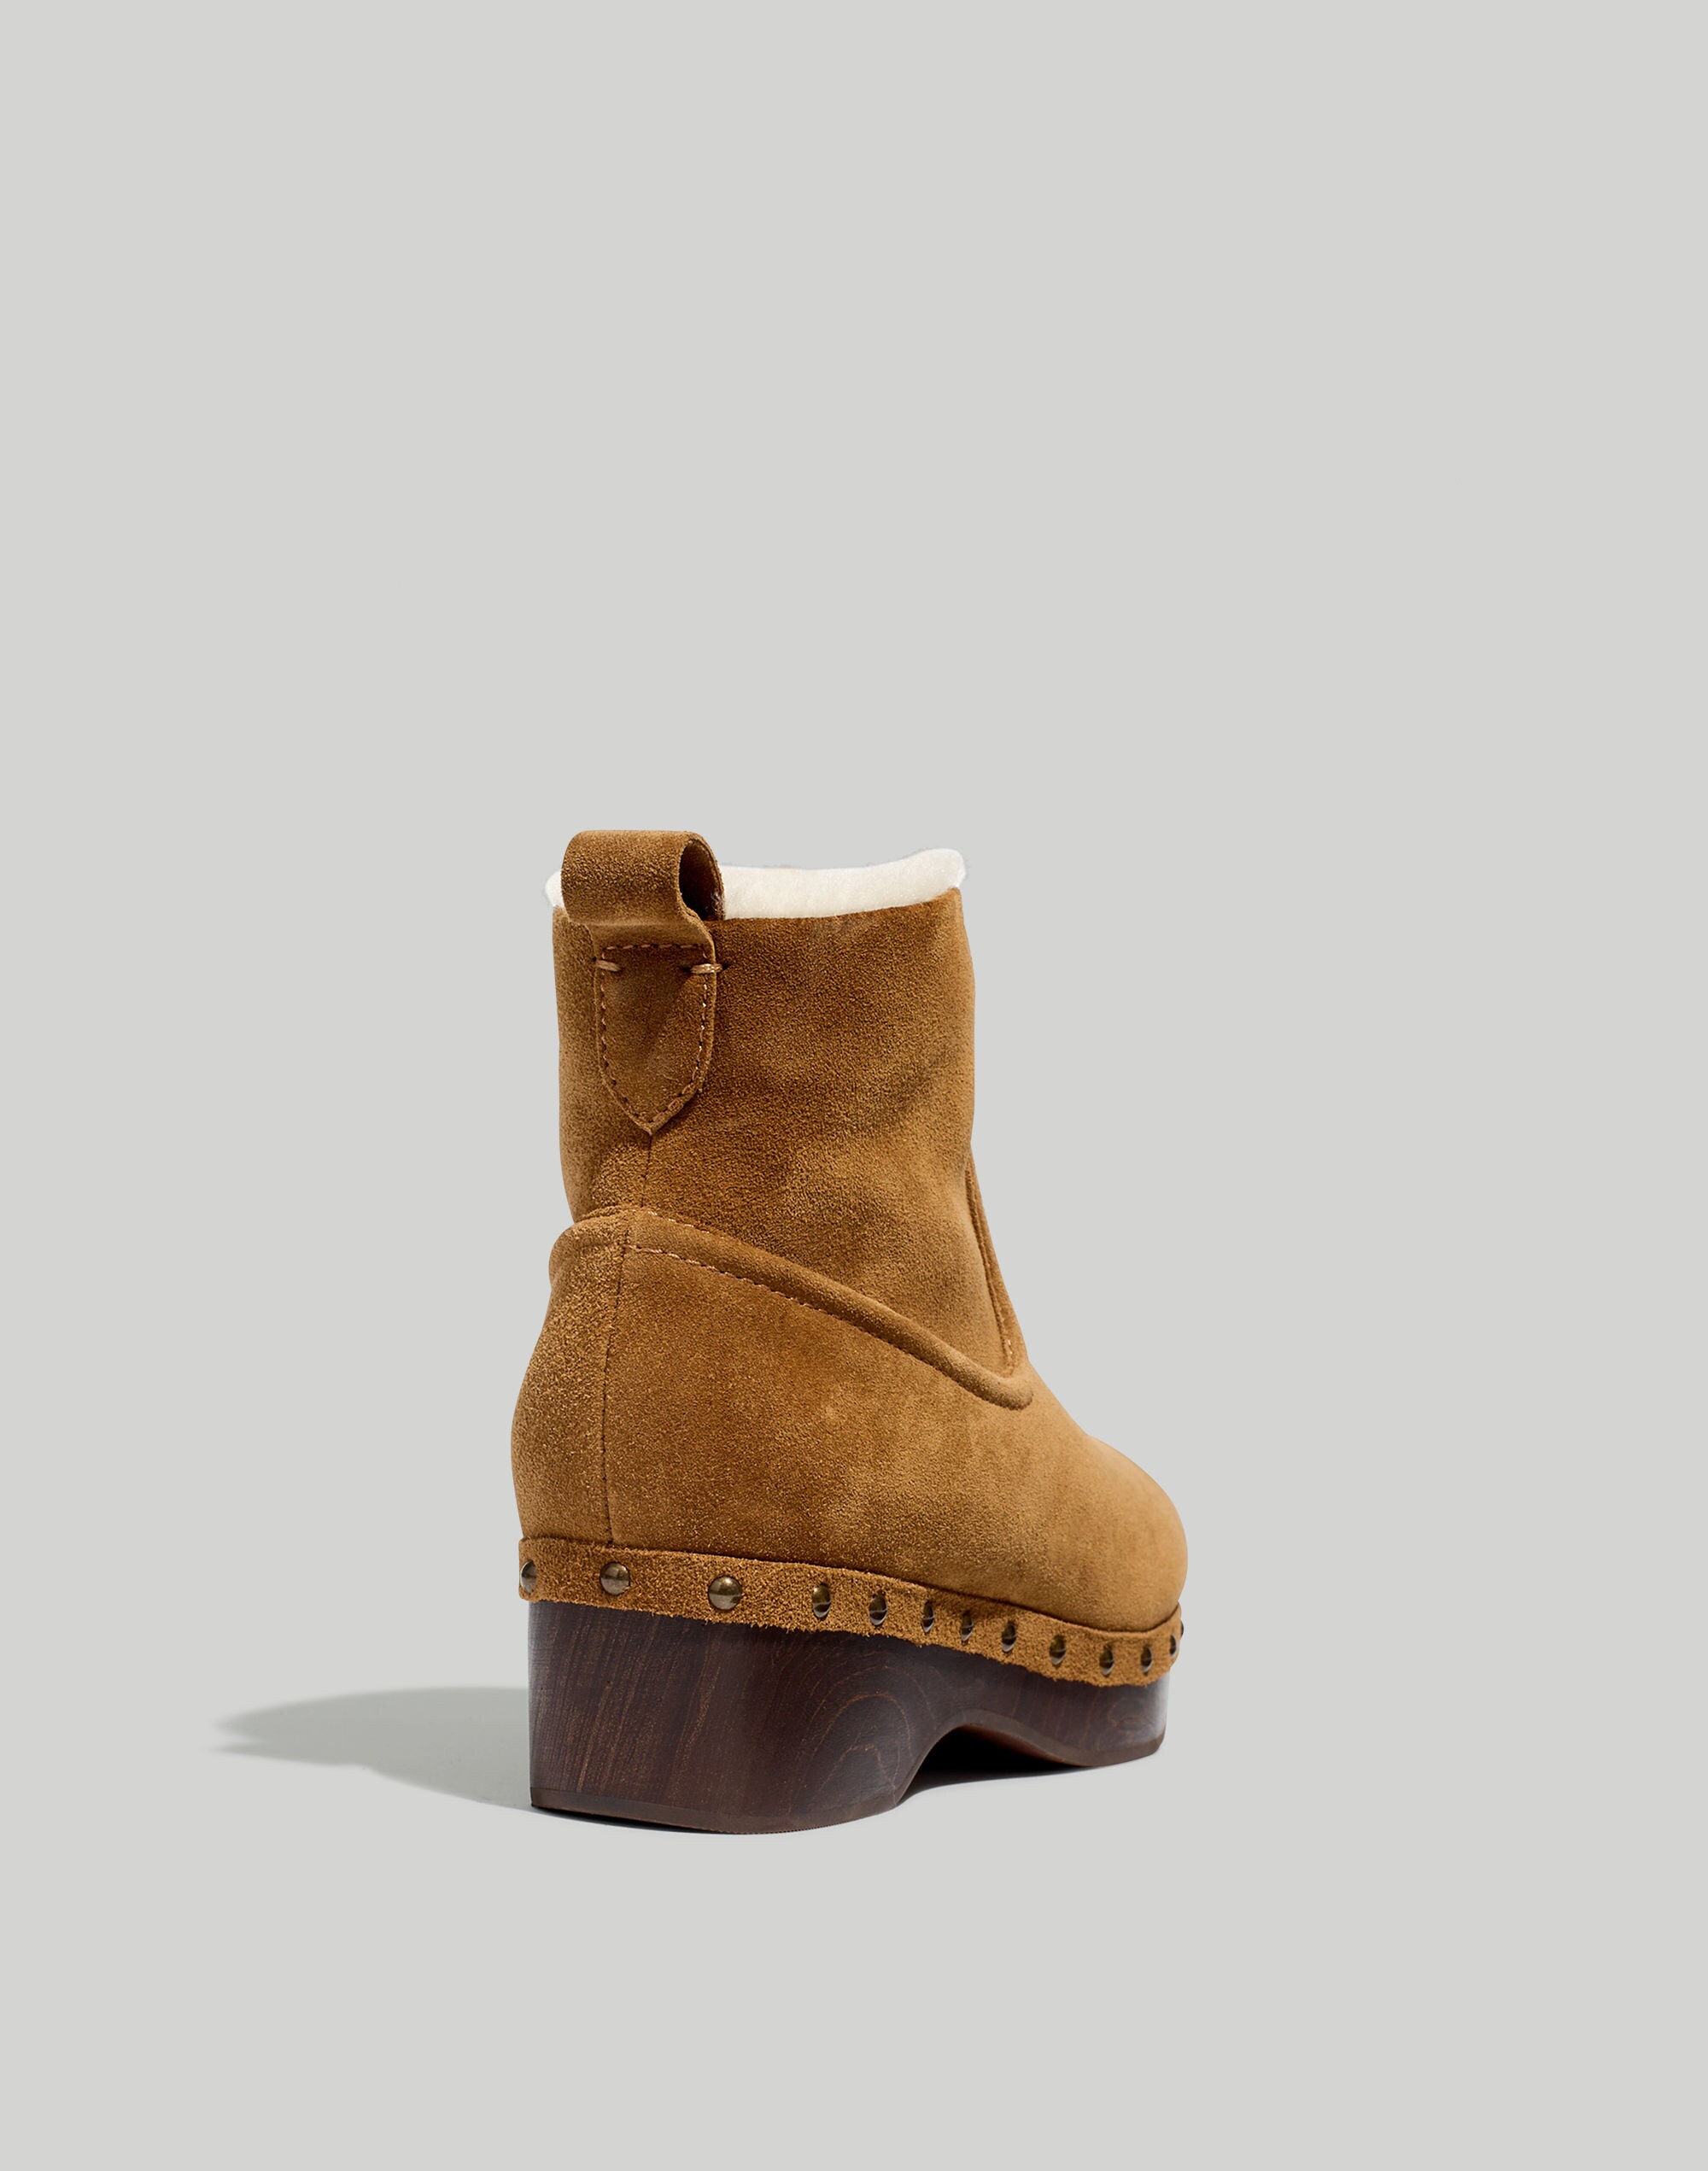 The Marceline Clog Boot Shearling